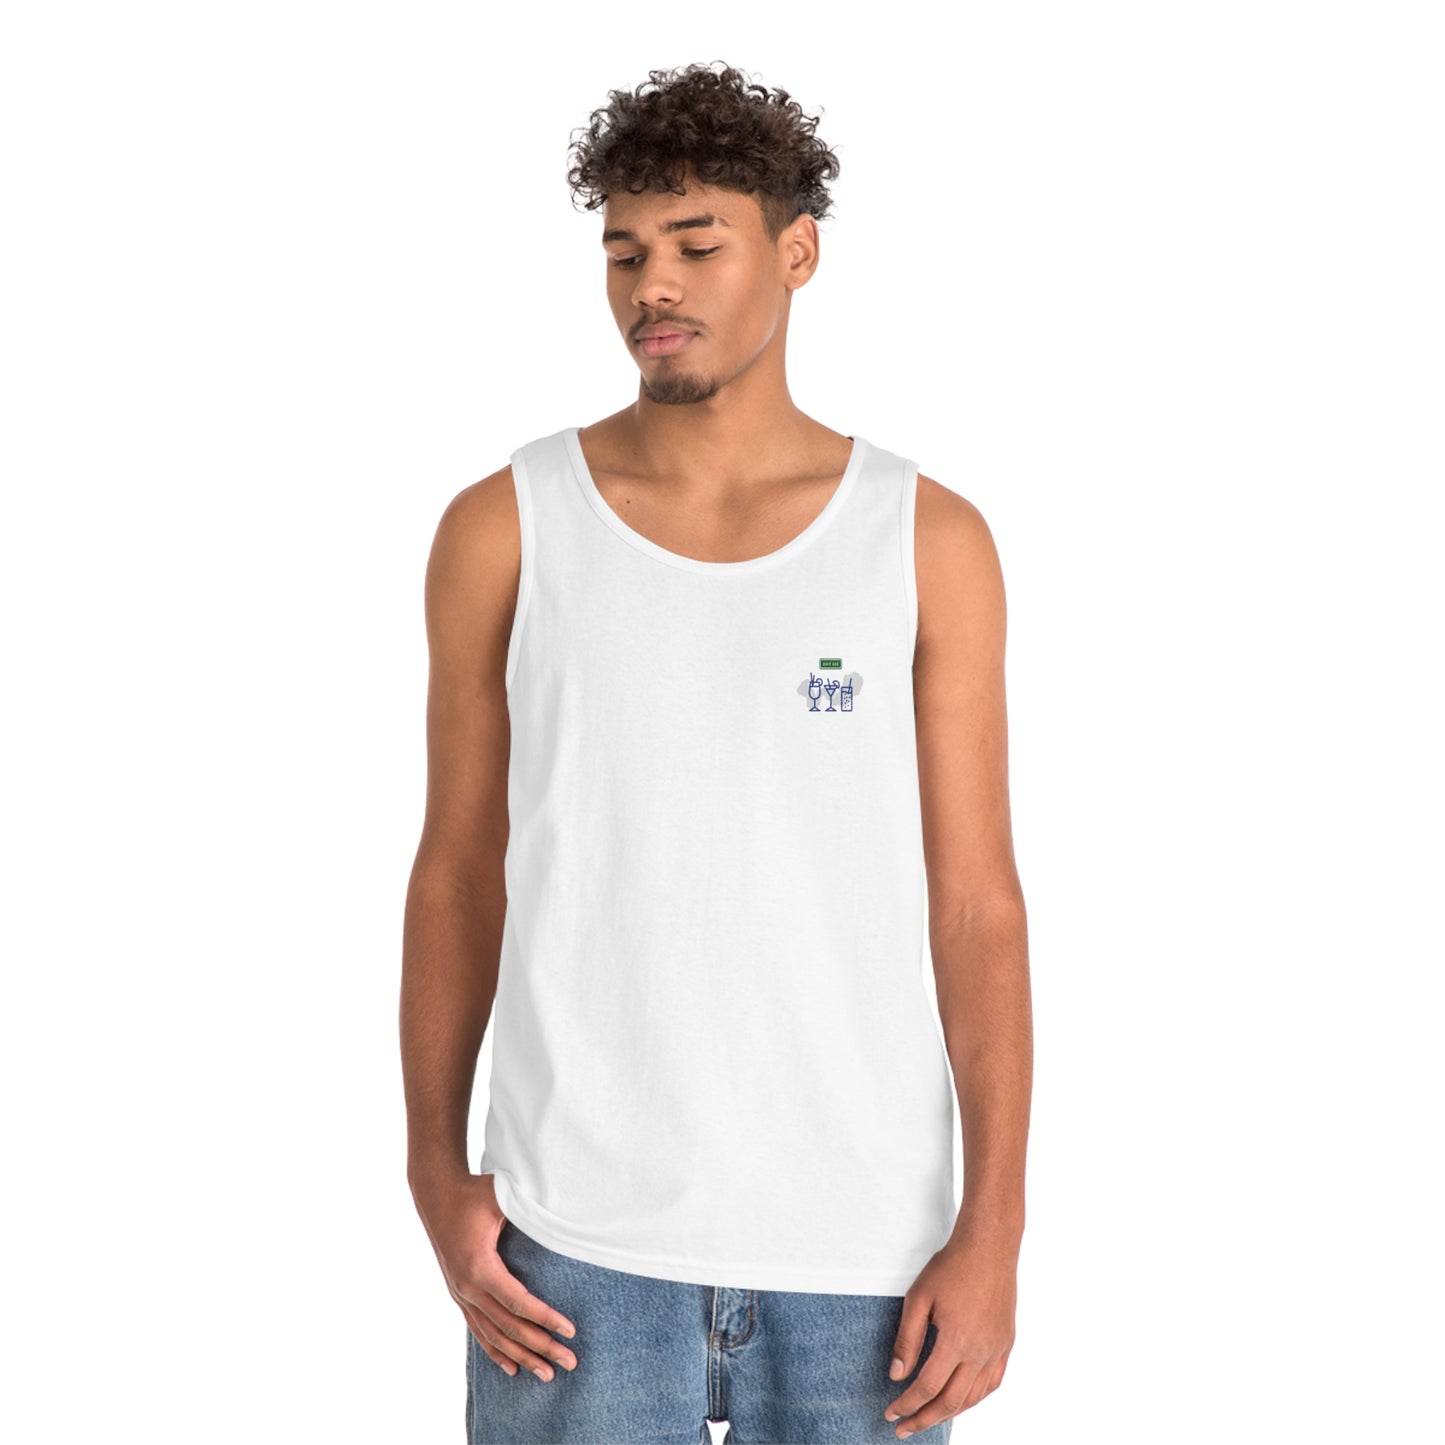 Pour Decisions on Lake St Helen Tank Top